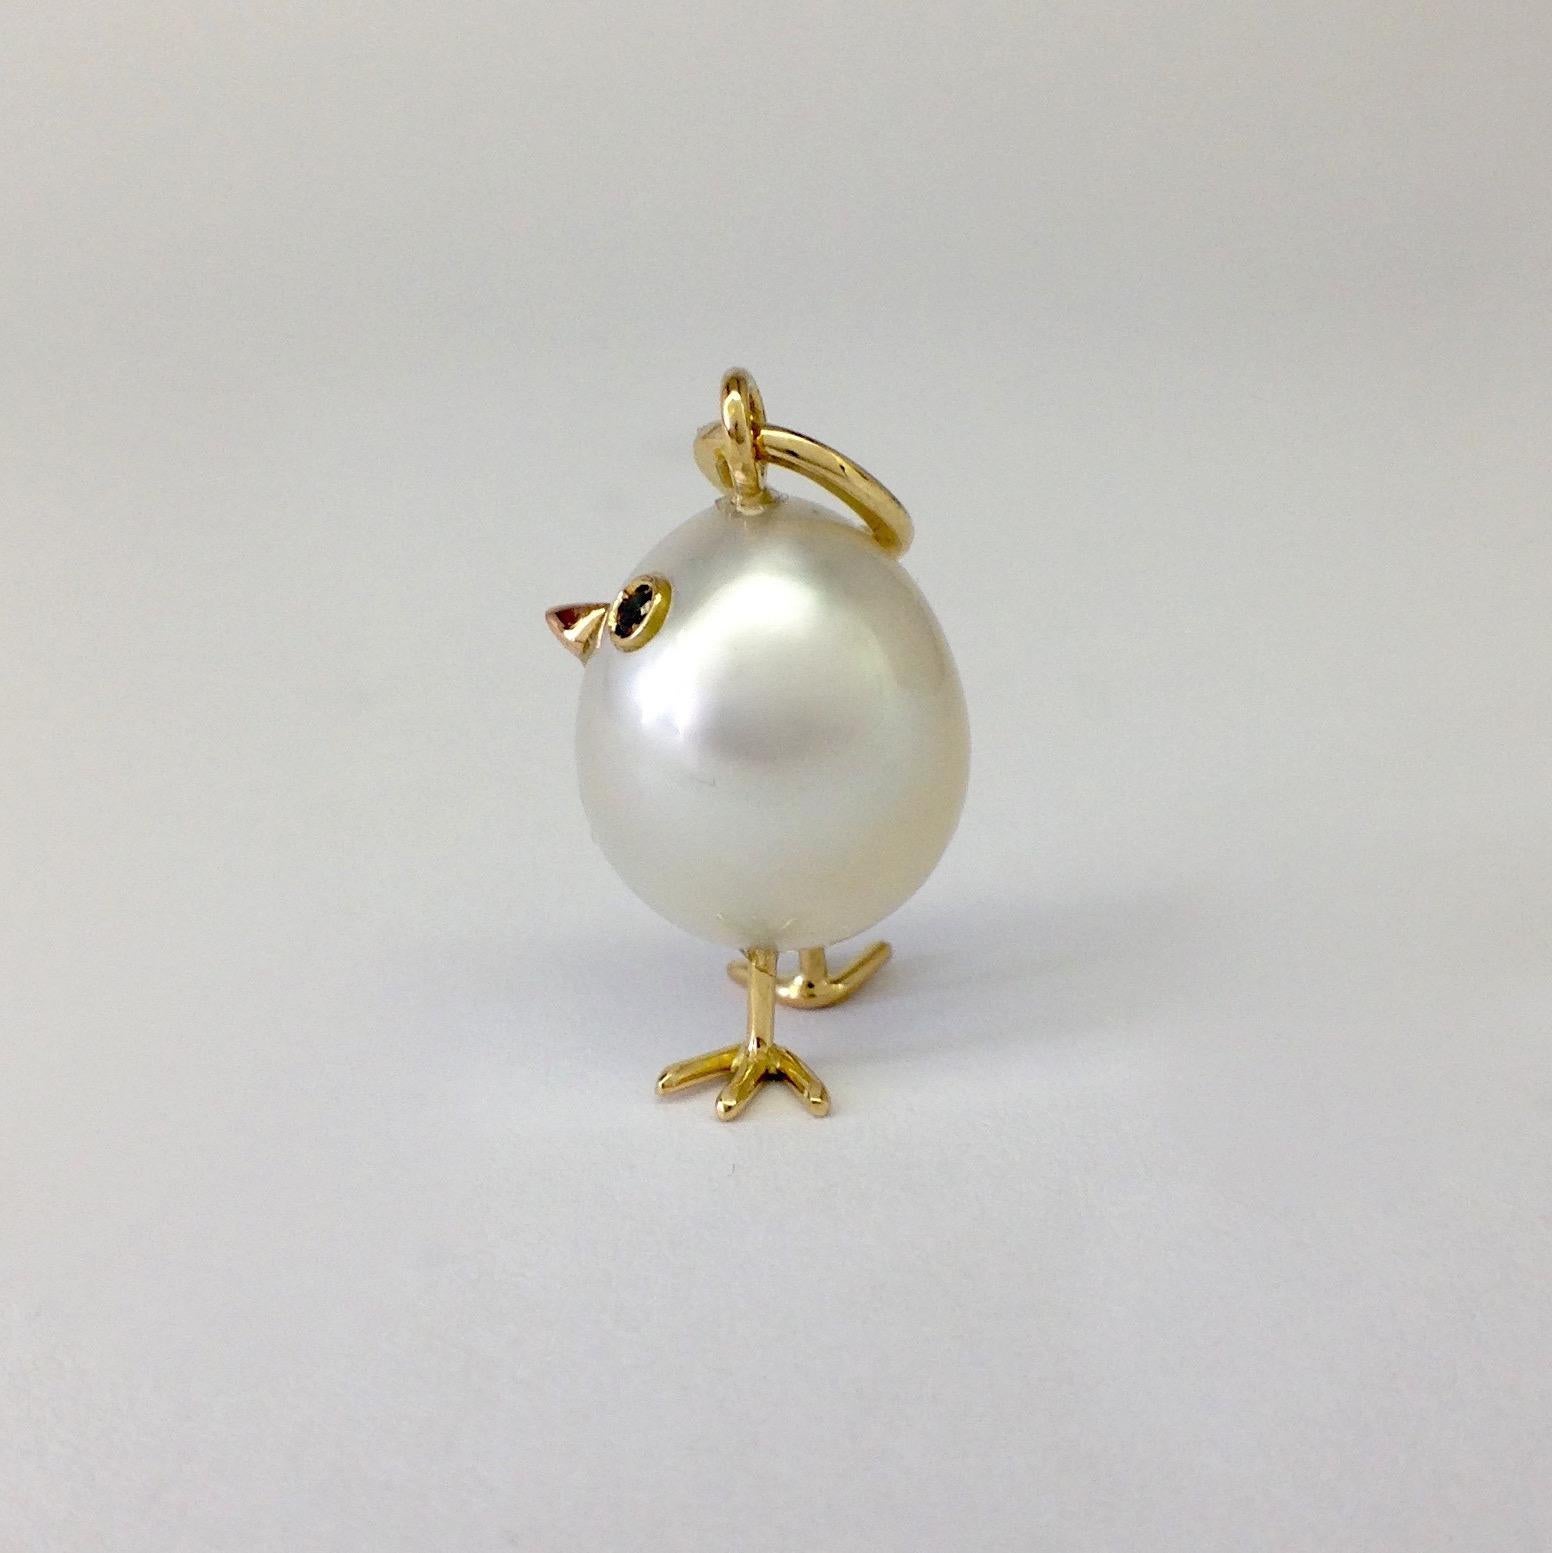 An Australian pearl has been carefully crafted to make a chick. He has his two legs, two eyes encrusted with two black diamonds and his beak. 
The gold is red for the beak, for the other elements it's yellow.
The caliber is ct 0.02
The chain is not